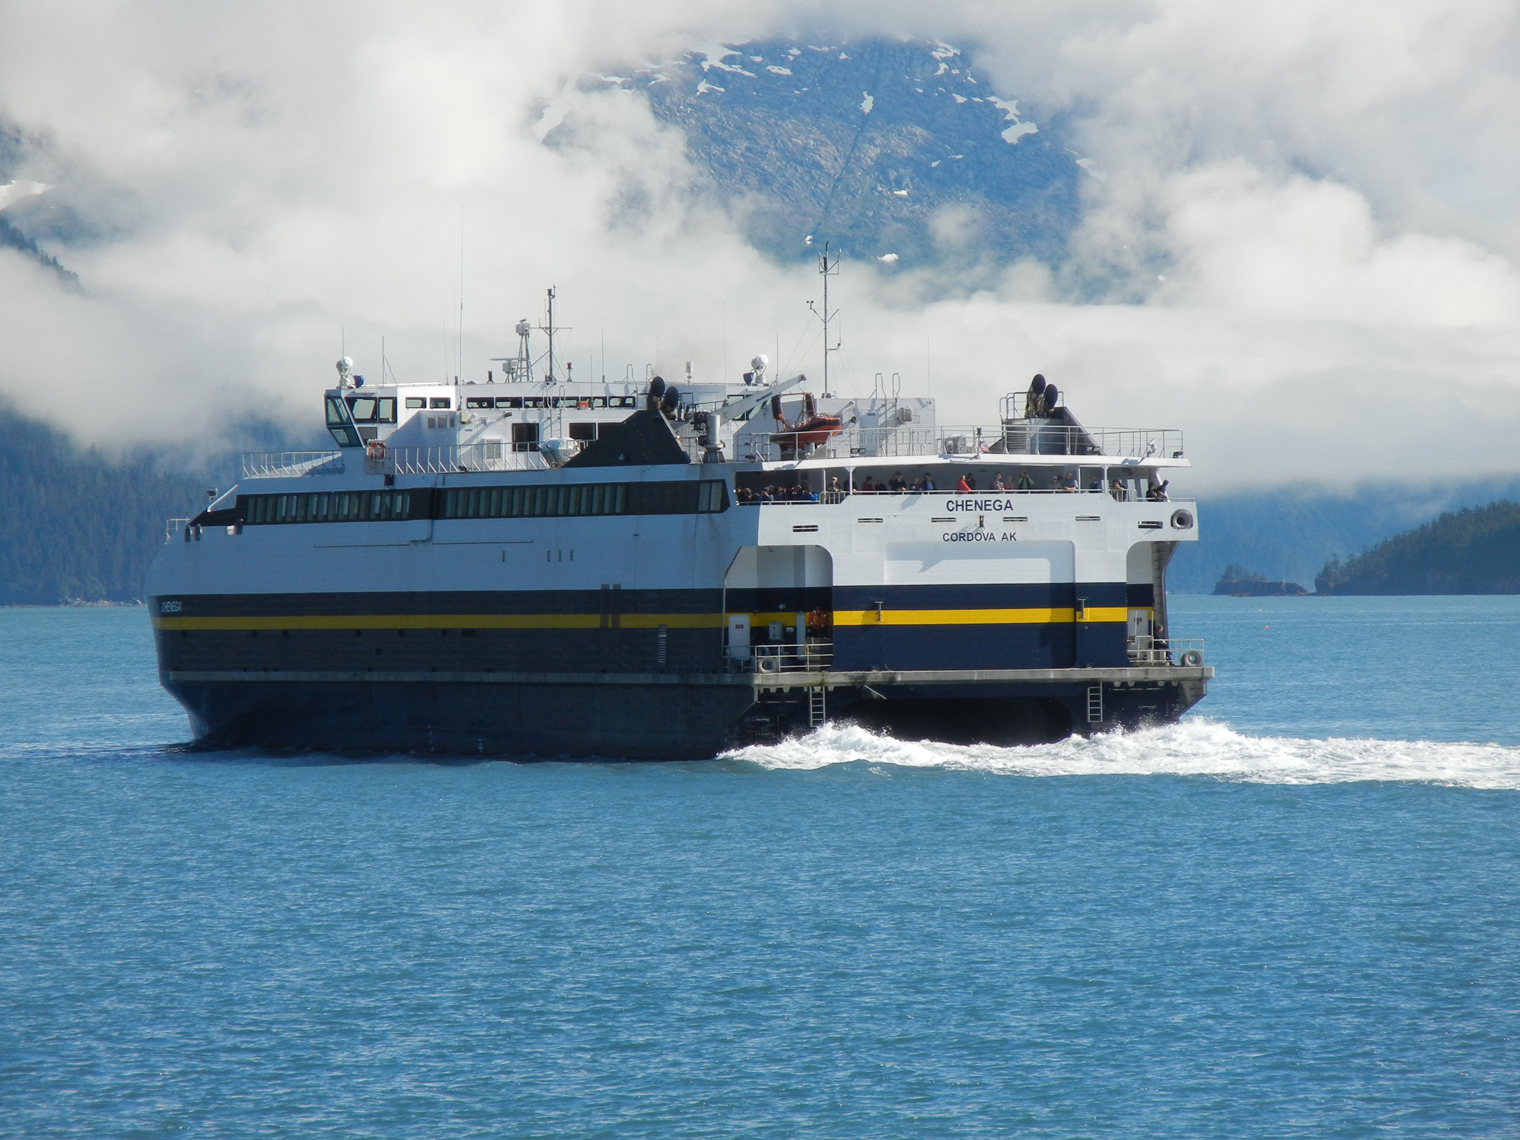 Budget cuts to the Alaska Marine Highway System could lead to significant service reductions when the 2016 state fiscal year begins July 1. For now, a conference committee has restored some cuts to the fast ferry Chenega’s Prince William Sound service. The Chenega is shown here steaming out of Whittier.-Photo by Andrew Jensen, Morris News Service - Alaska